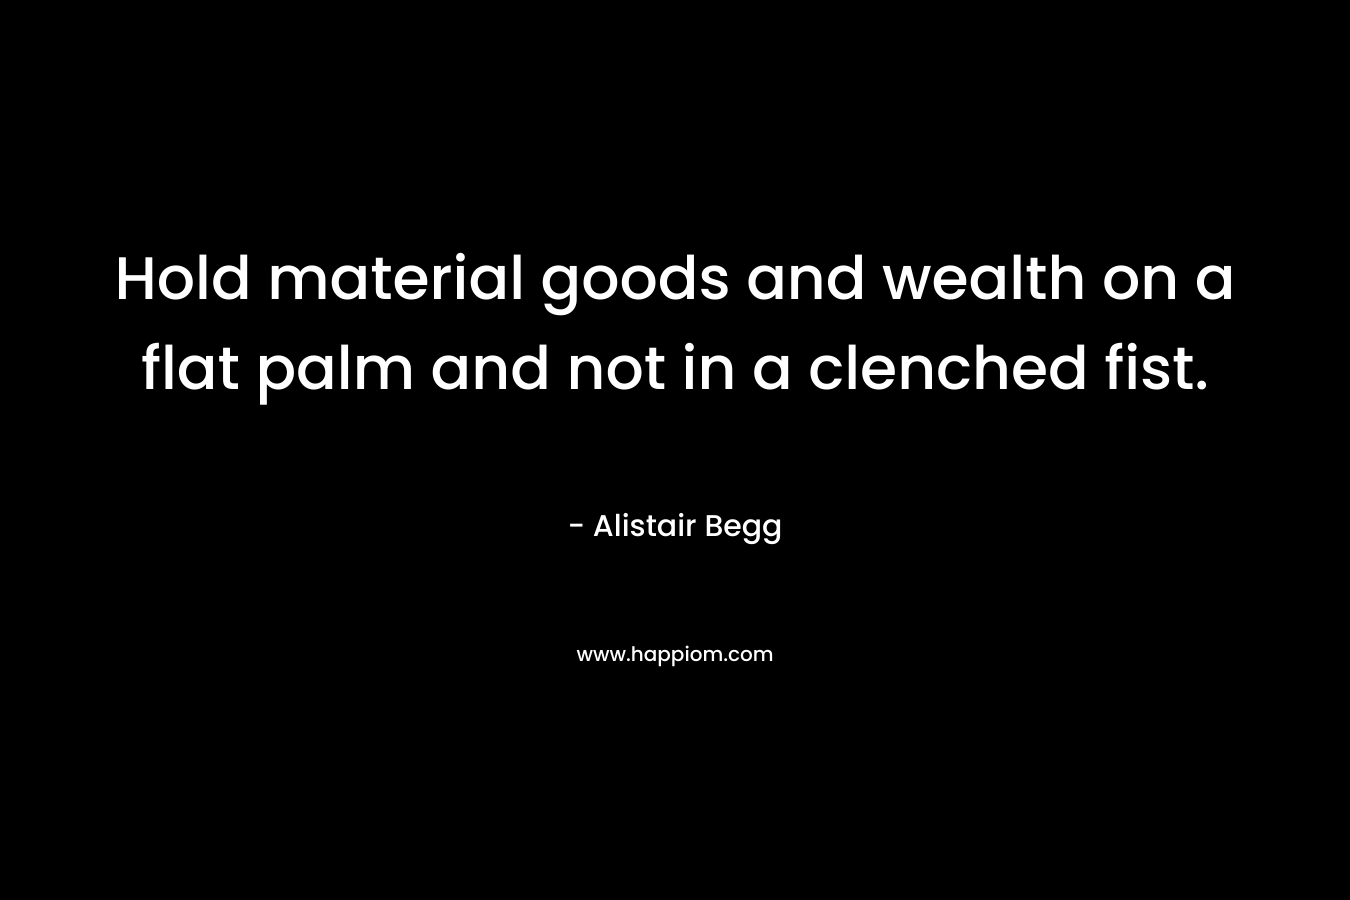 Hold material goods and wealth on a flat palm and not in a clenched fist. – Alistair Begg